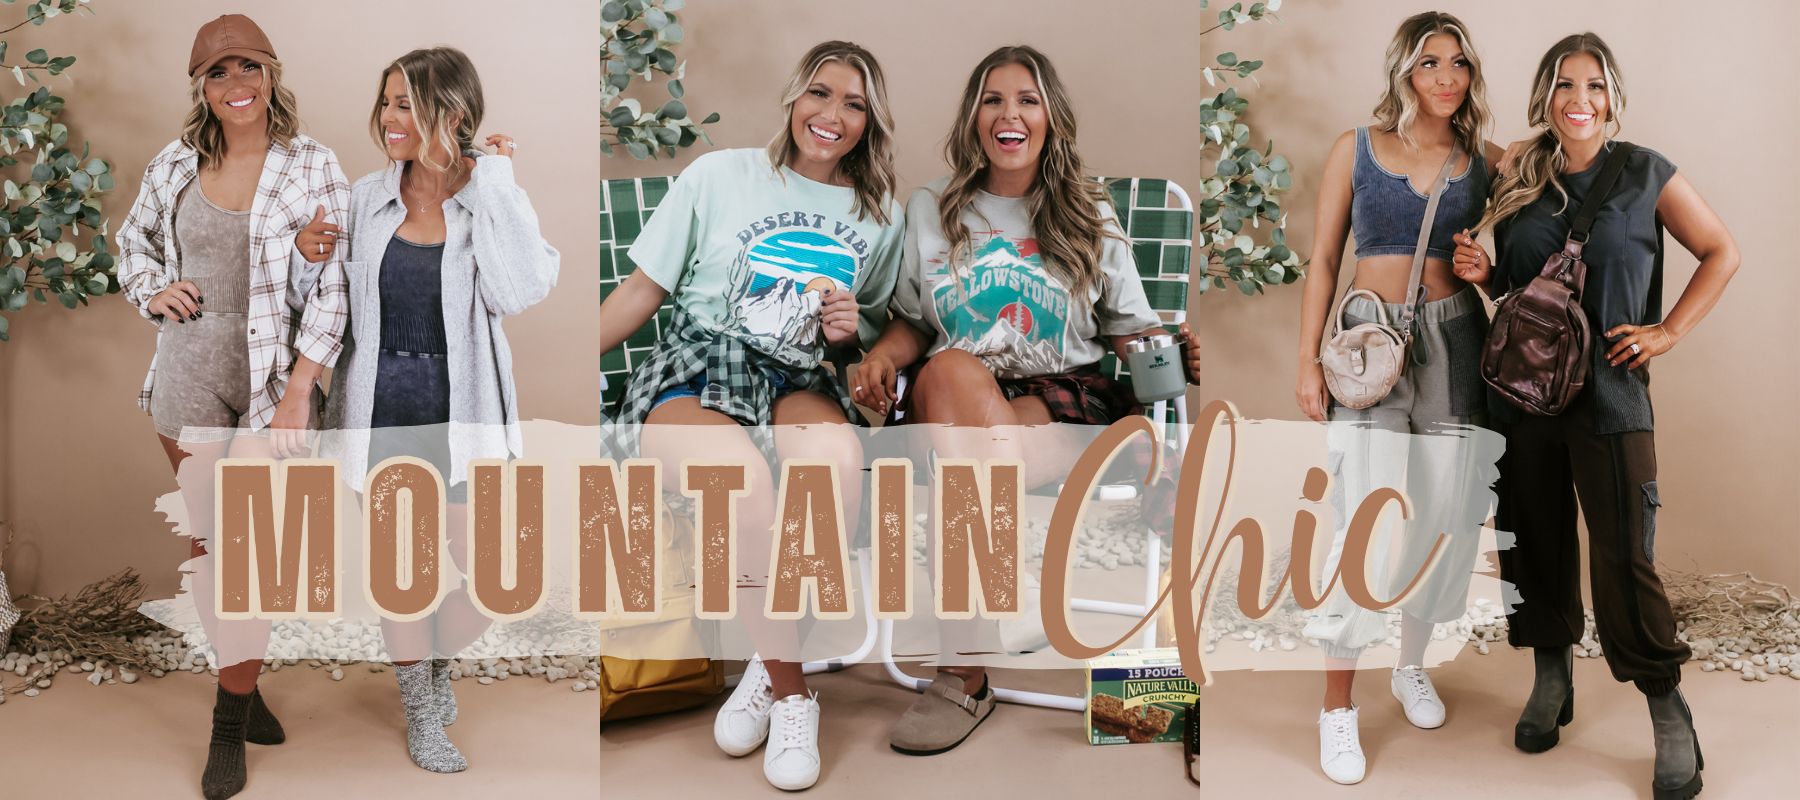 MOUNTAIN CHIC GRANOLA GIRL OUTFITS